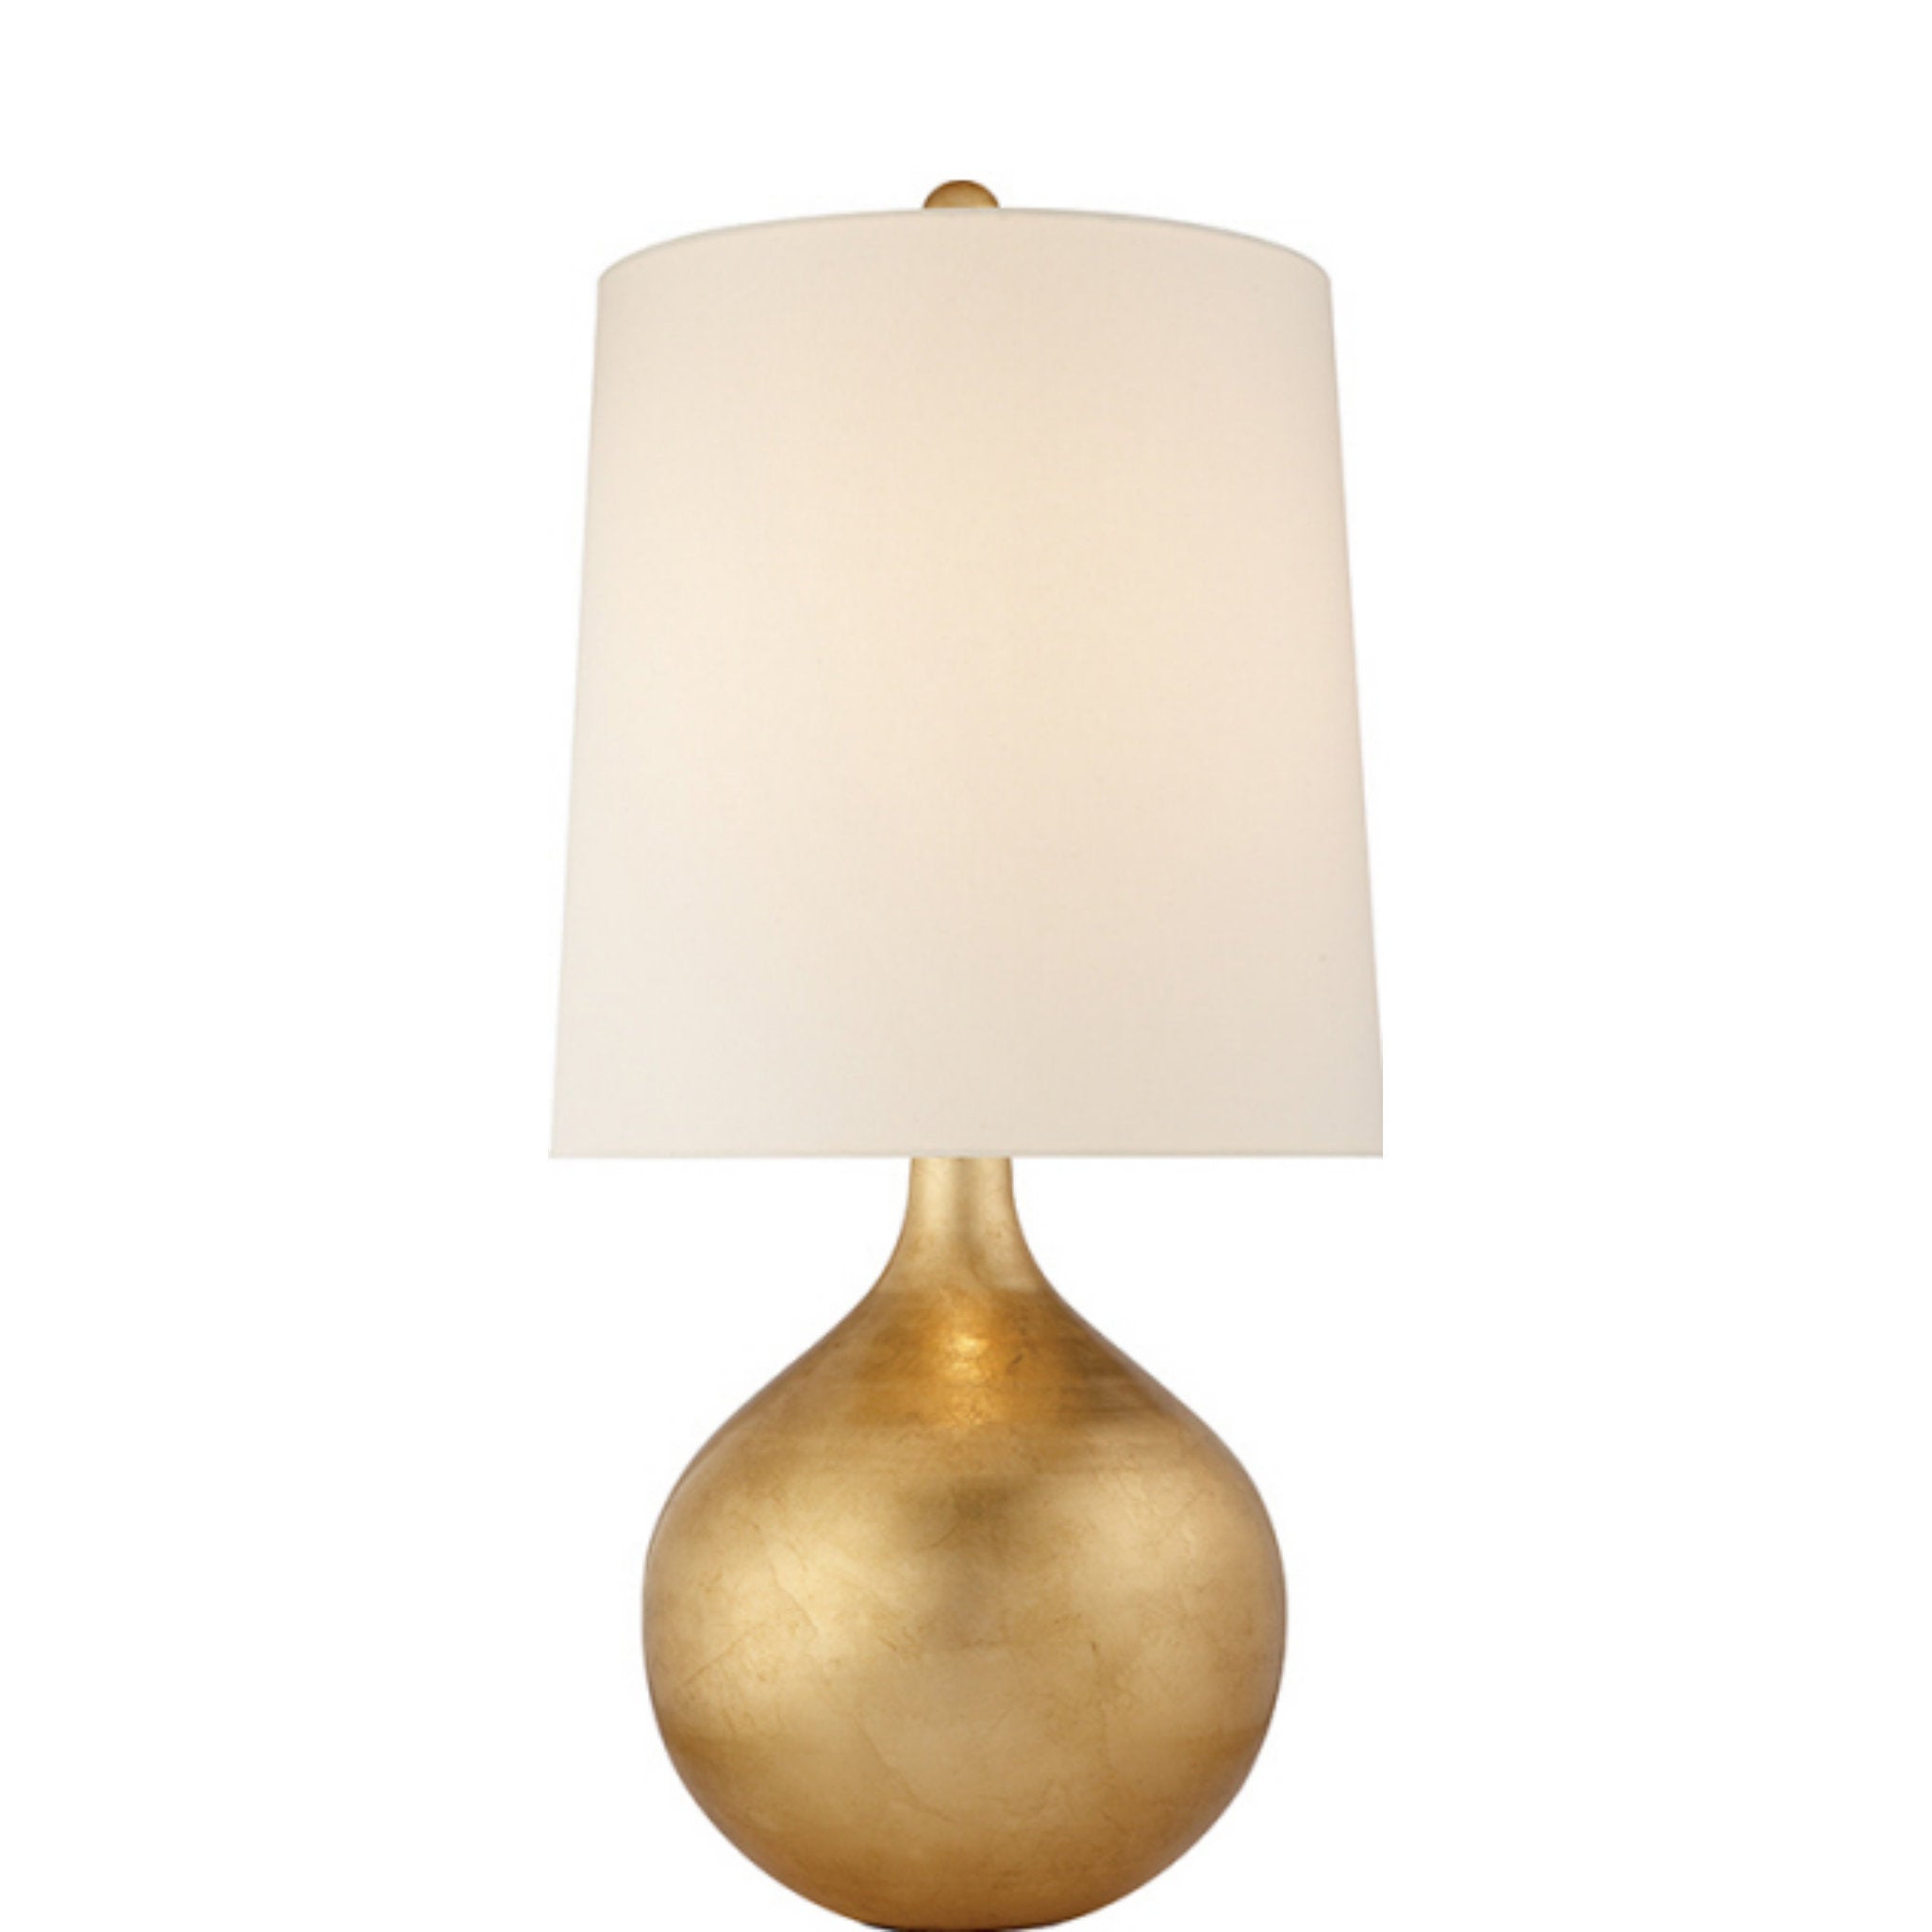 AERIN Warren Table Lamp in Gild with Linen Shade